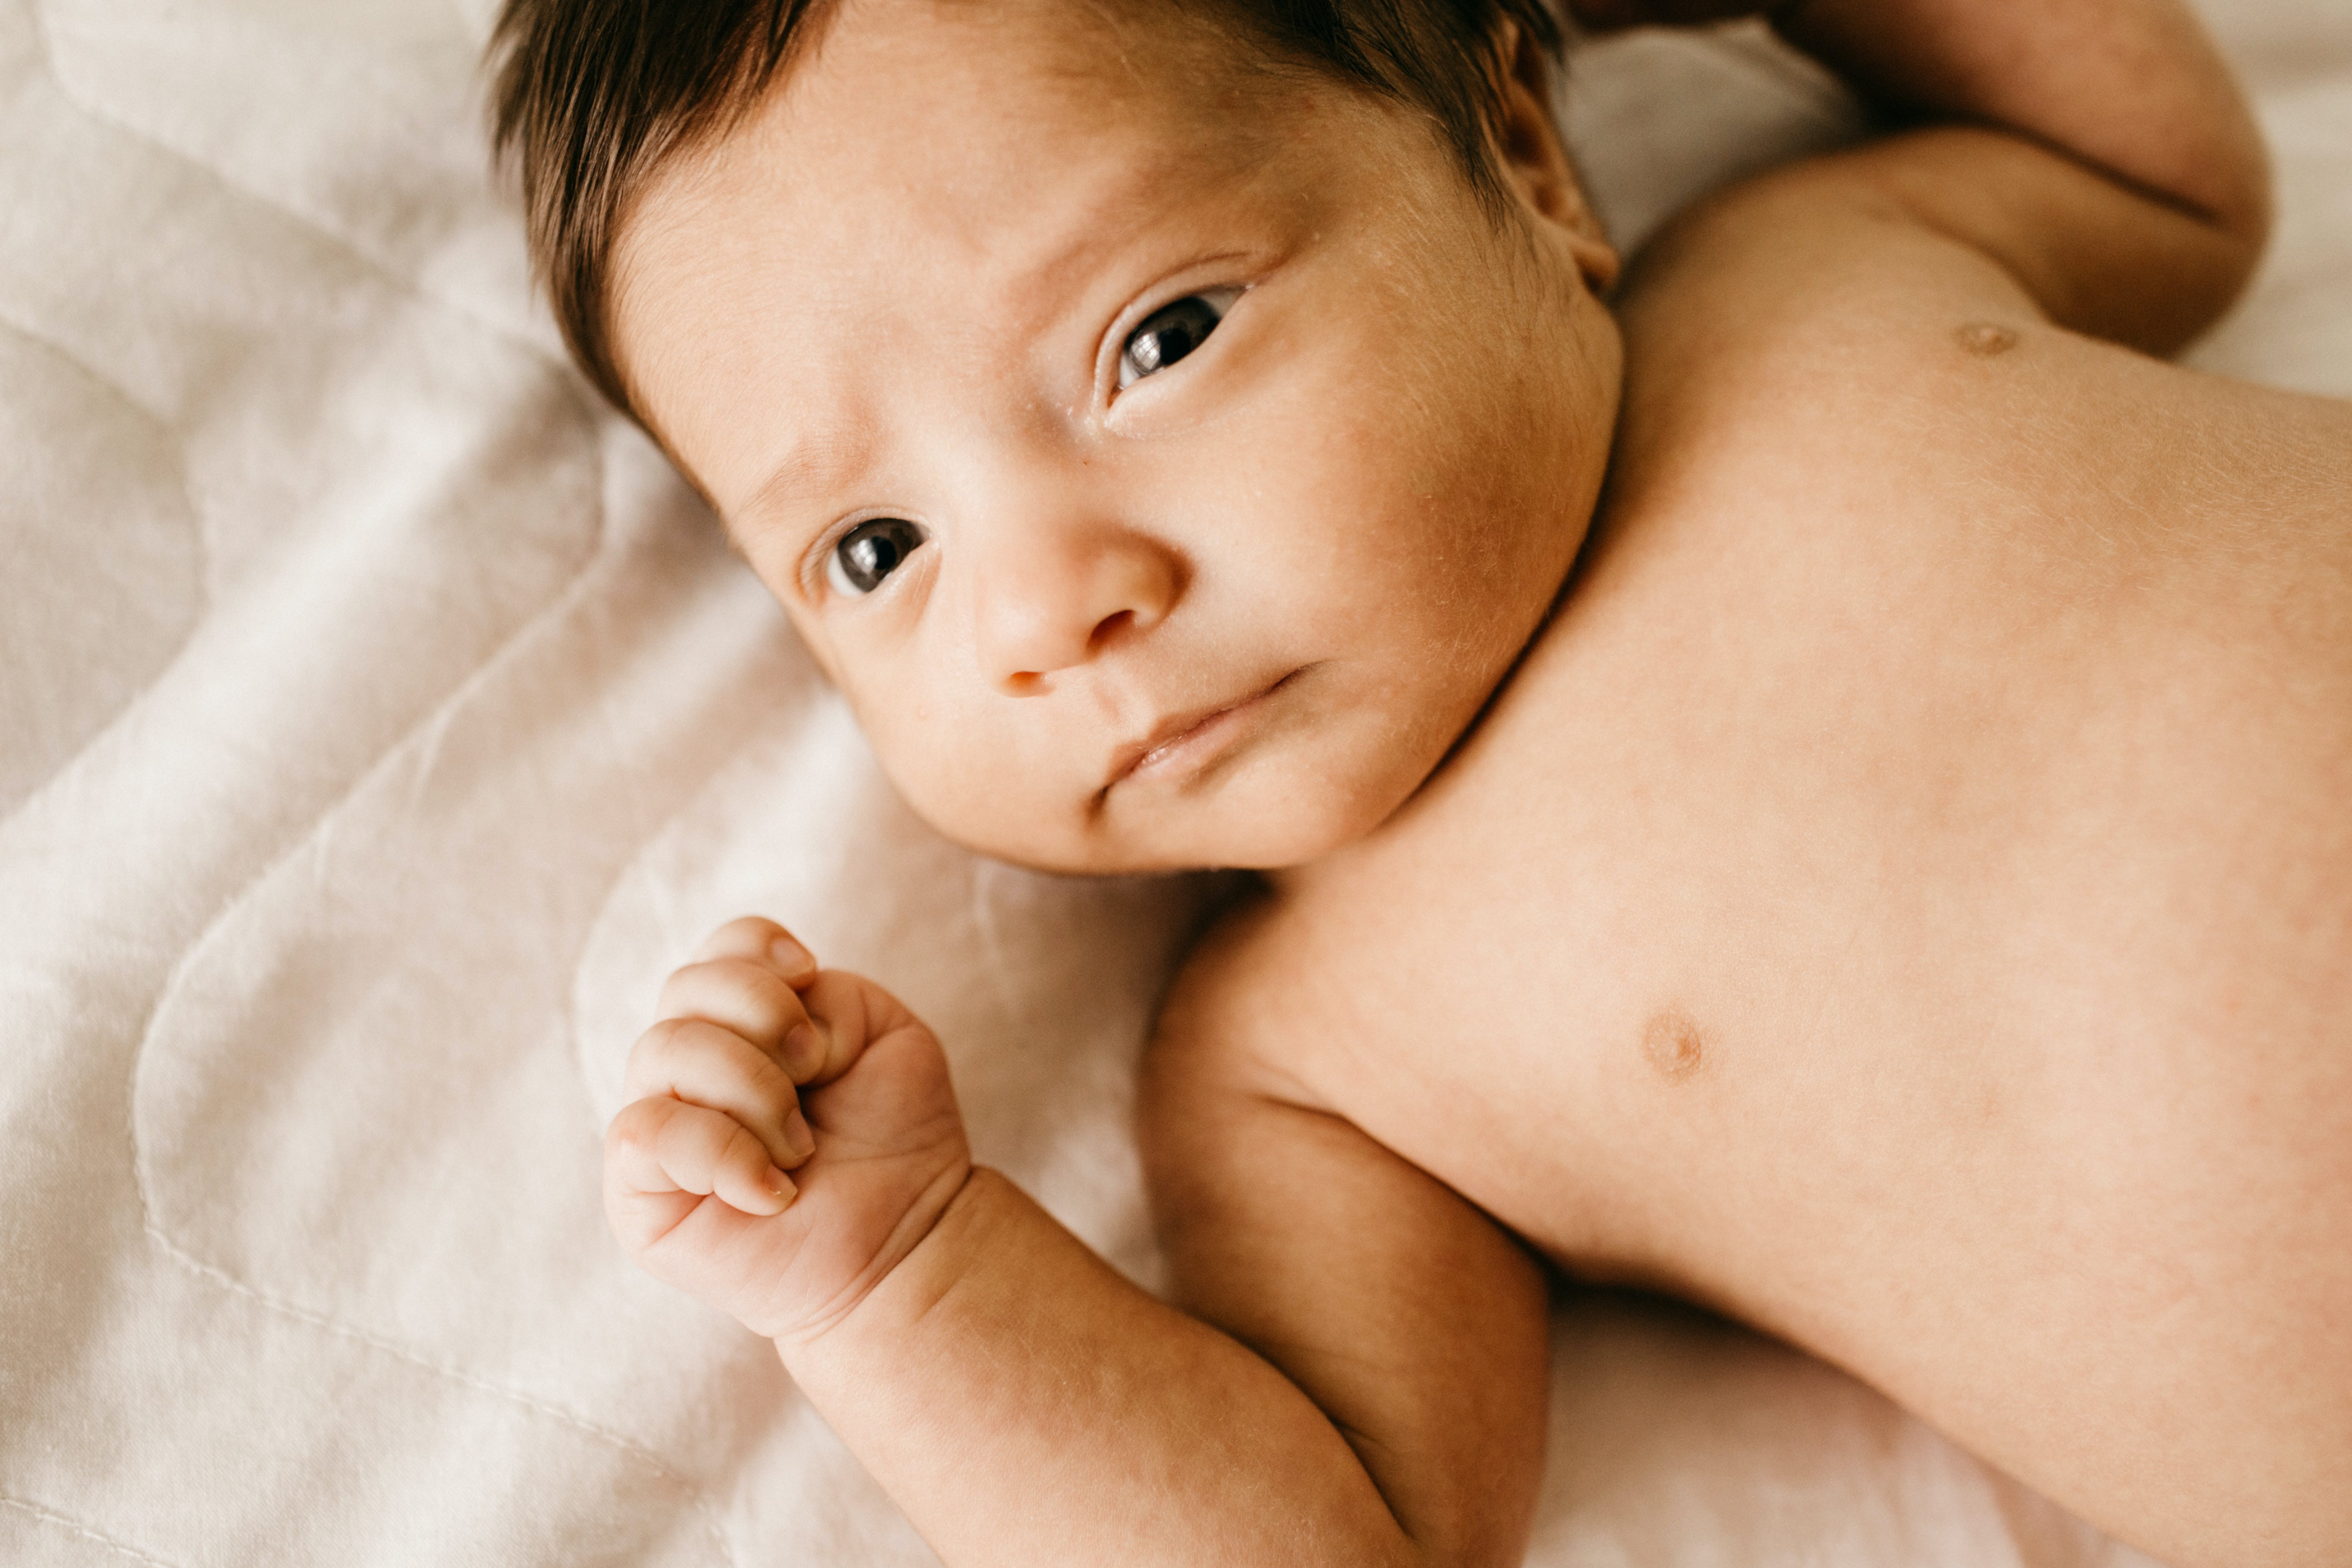 Photo by Jonathan Borba: https://www.pexels.com/photo/close-up-photo-of-topless-baby-lying-on-a-bed-3763590/